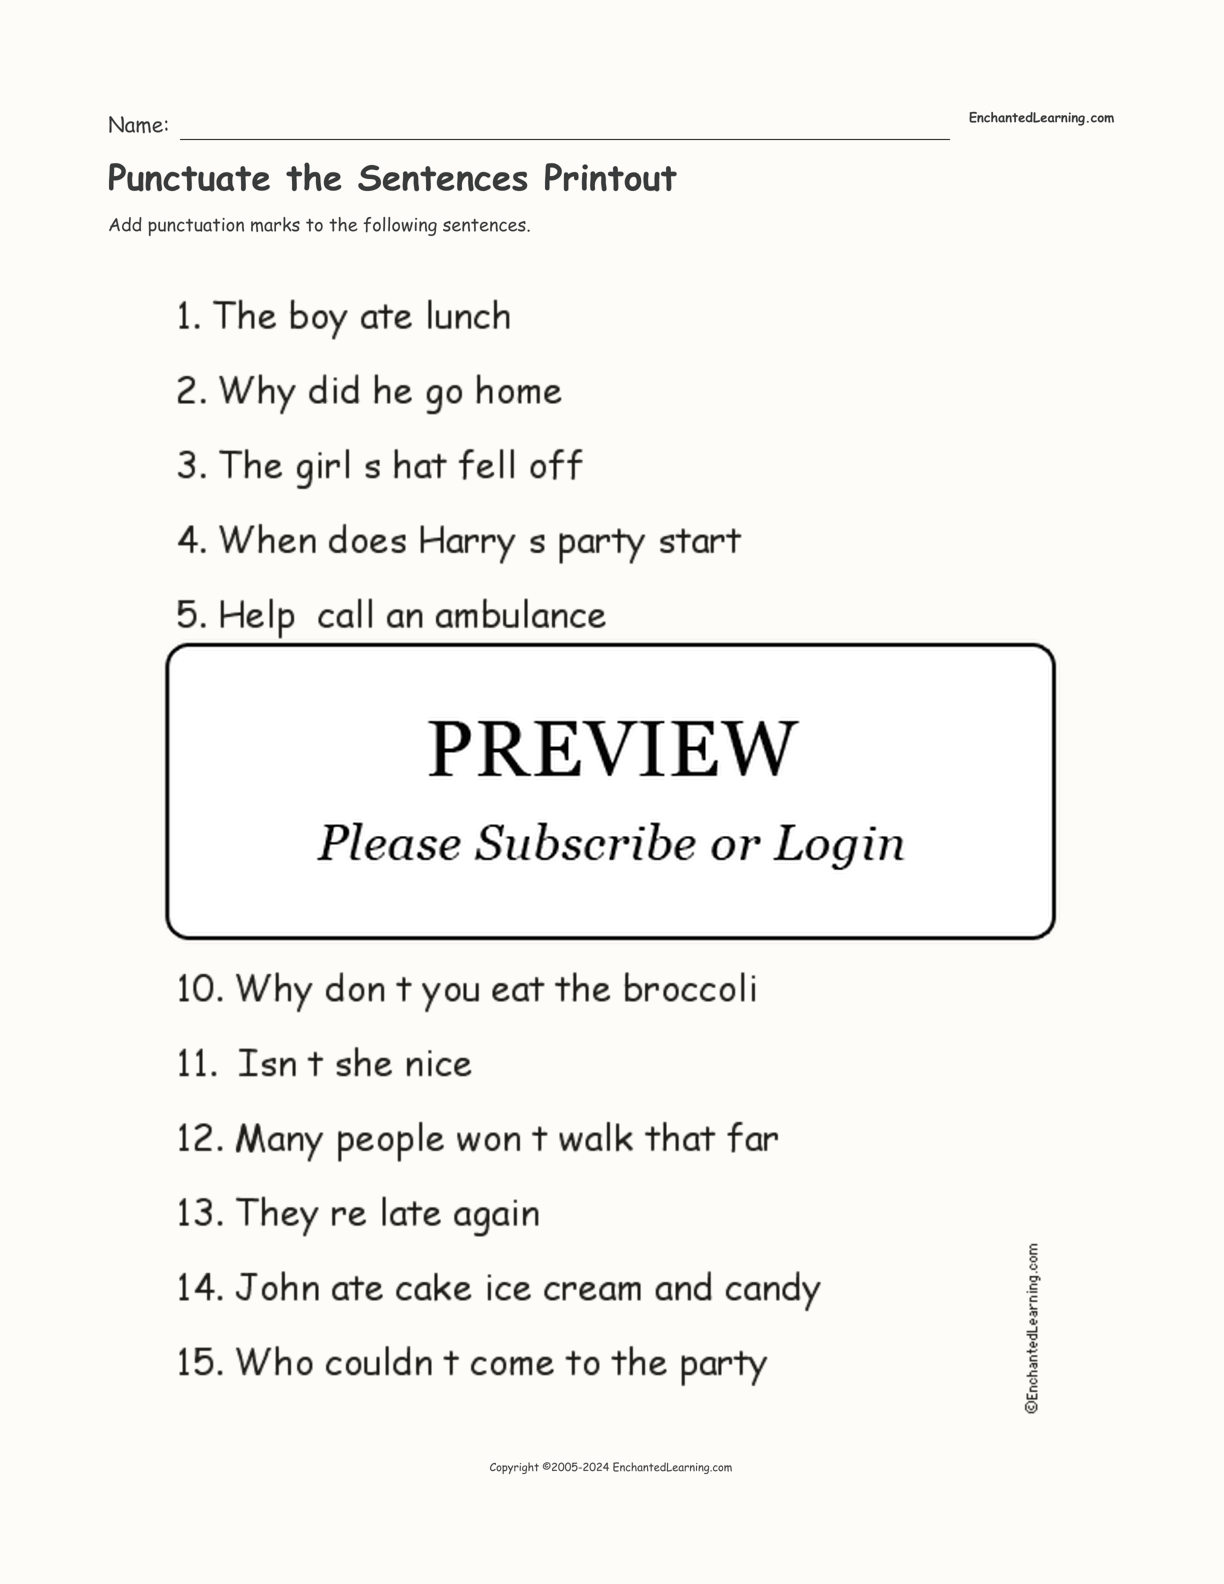 Punctuate the Sentences Printout interactive worksheet page 1